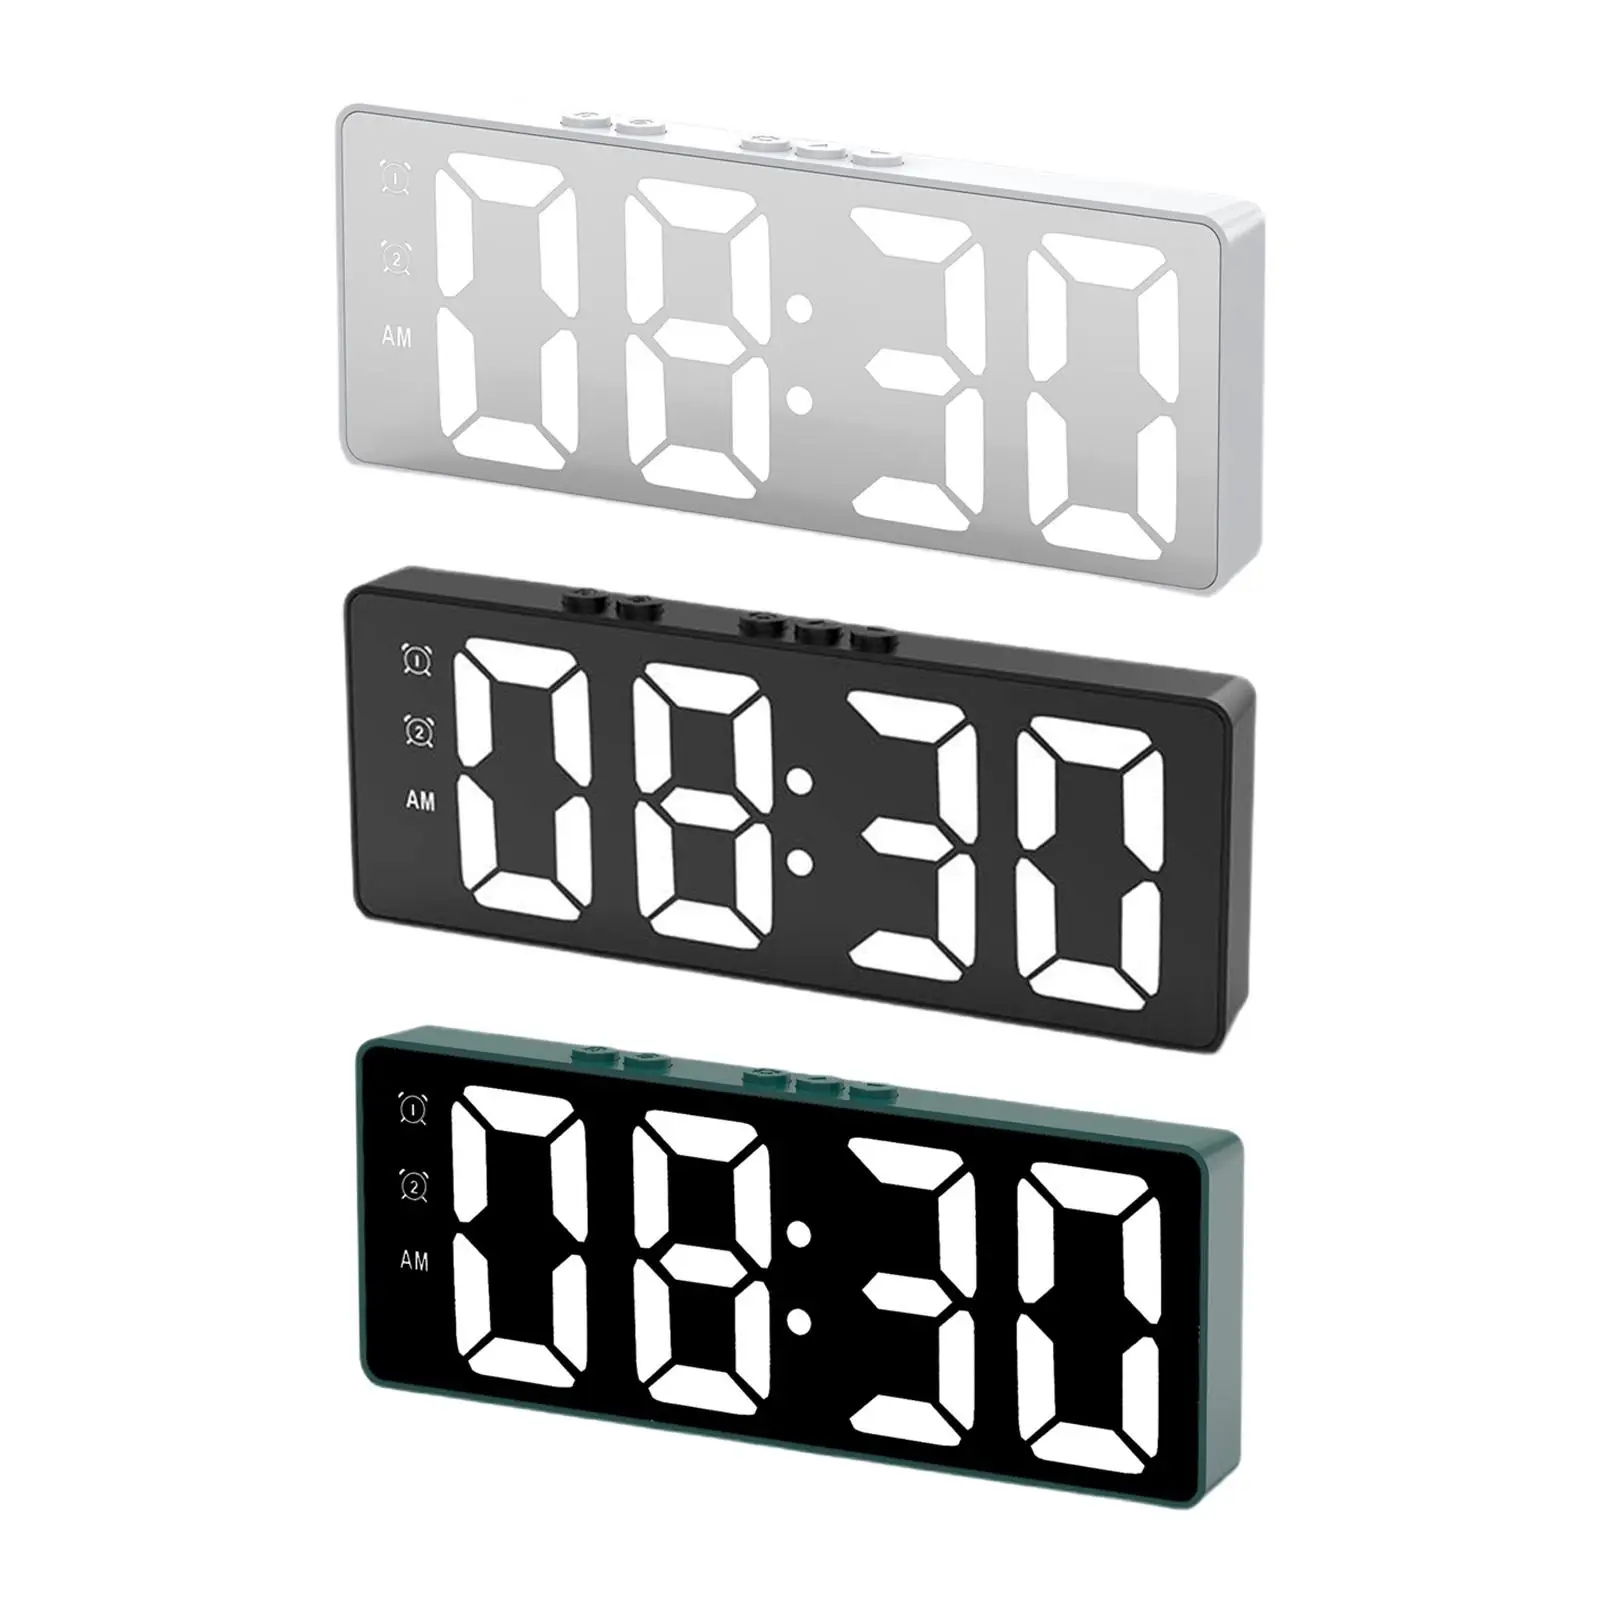 Electronic Clock Dual Alarm Clock Temperature Display for Office, Home, Gifts